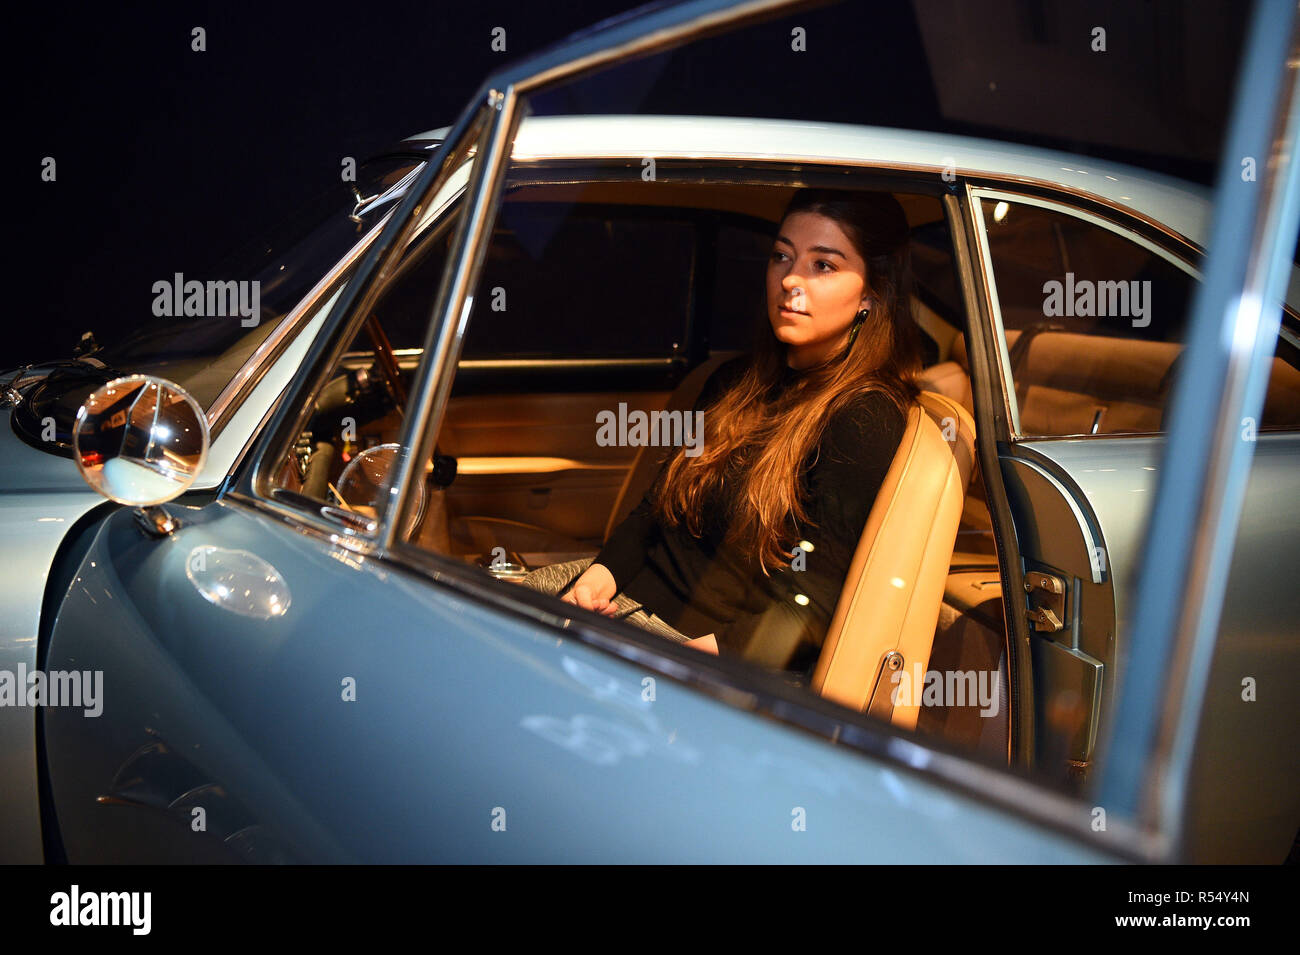 Auction house assistant Becky sits in a 1966 Ferrari 500 Superfast Series II Coupe, during a photo call for &pound;20m supercars before they are offered at auction, at Bonhams in New Bond Street, London. Stock Photo